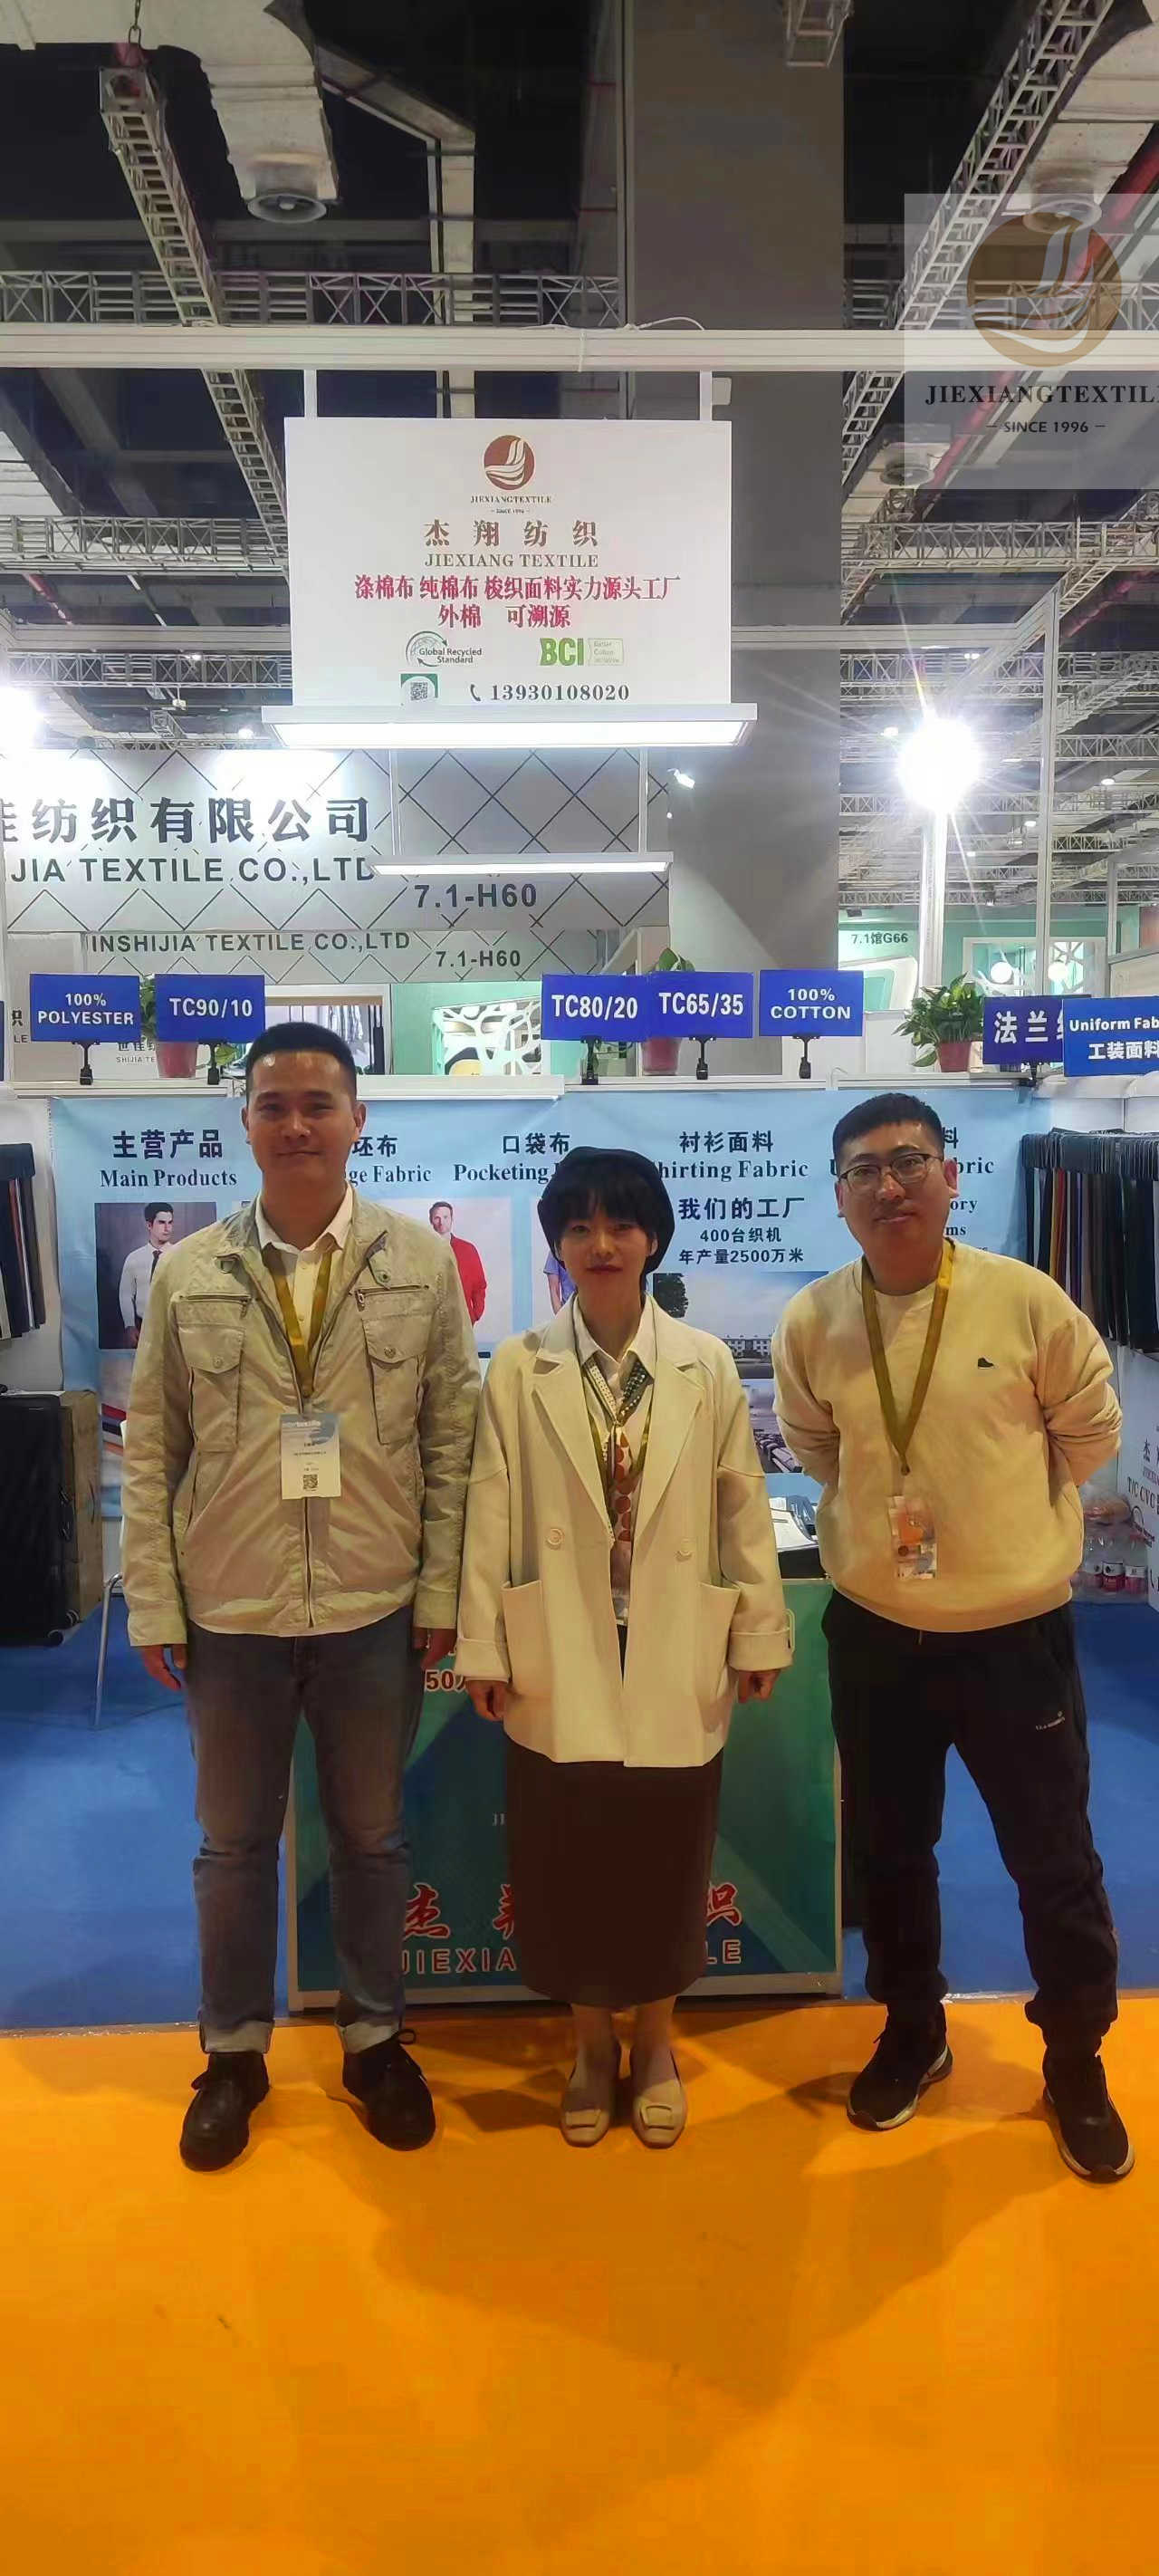 China International Textile Fabrics and Accessories Exhibition